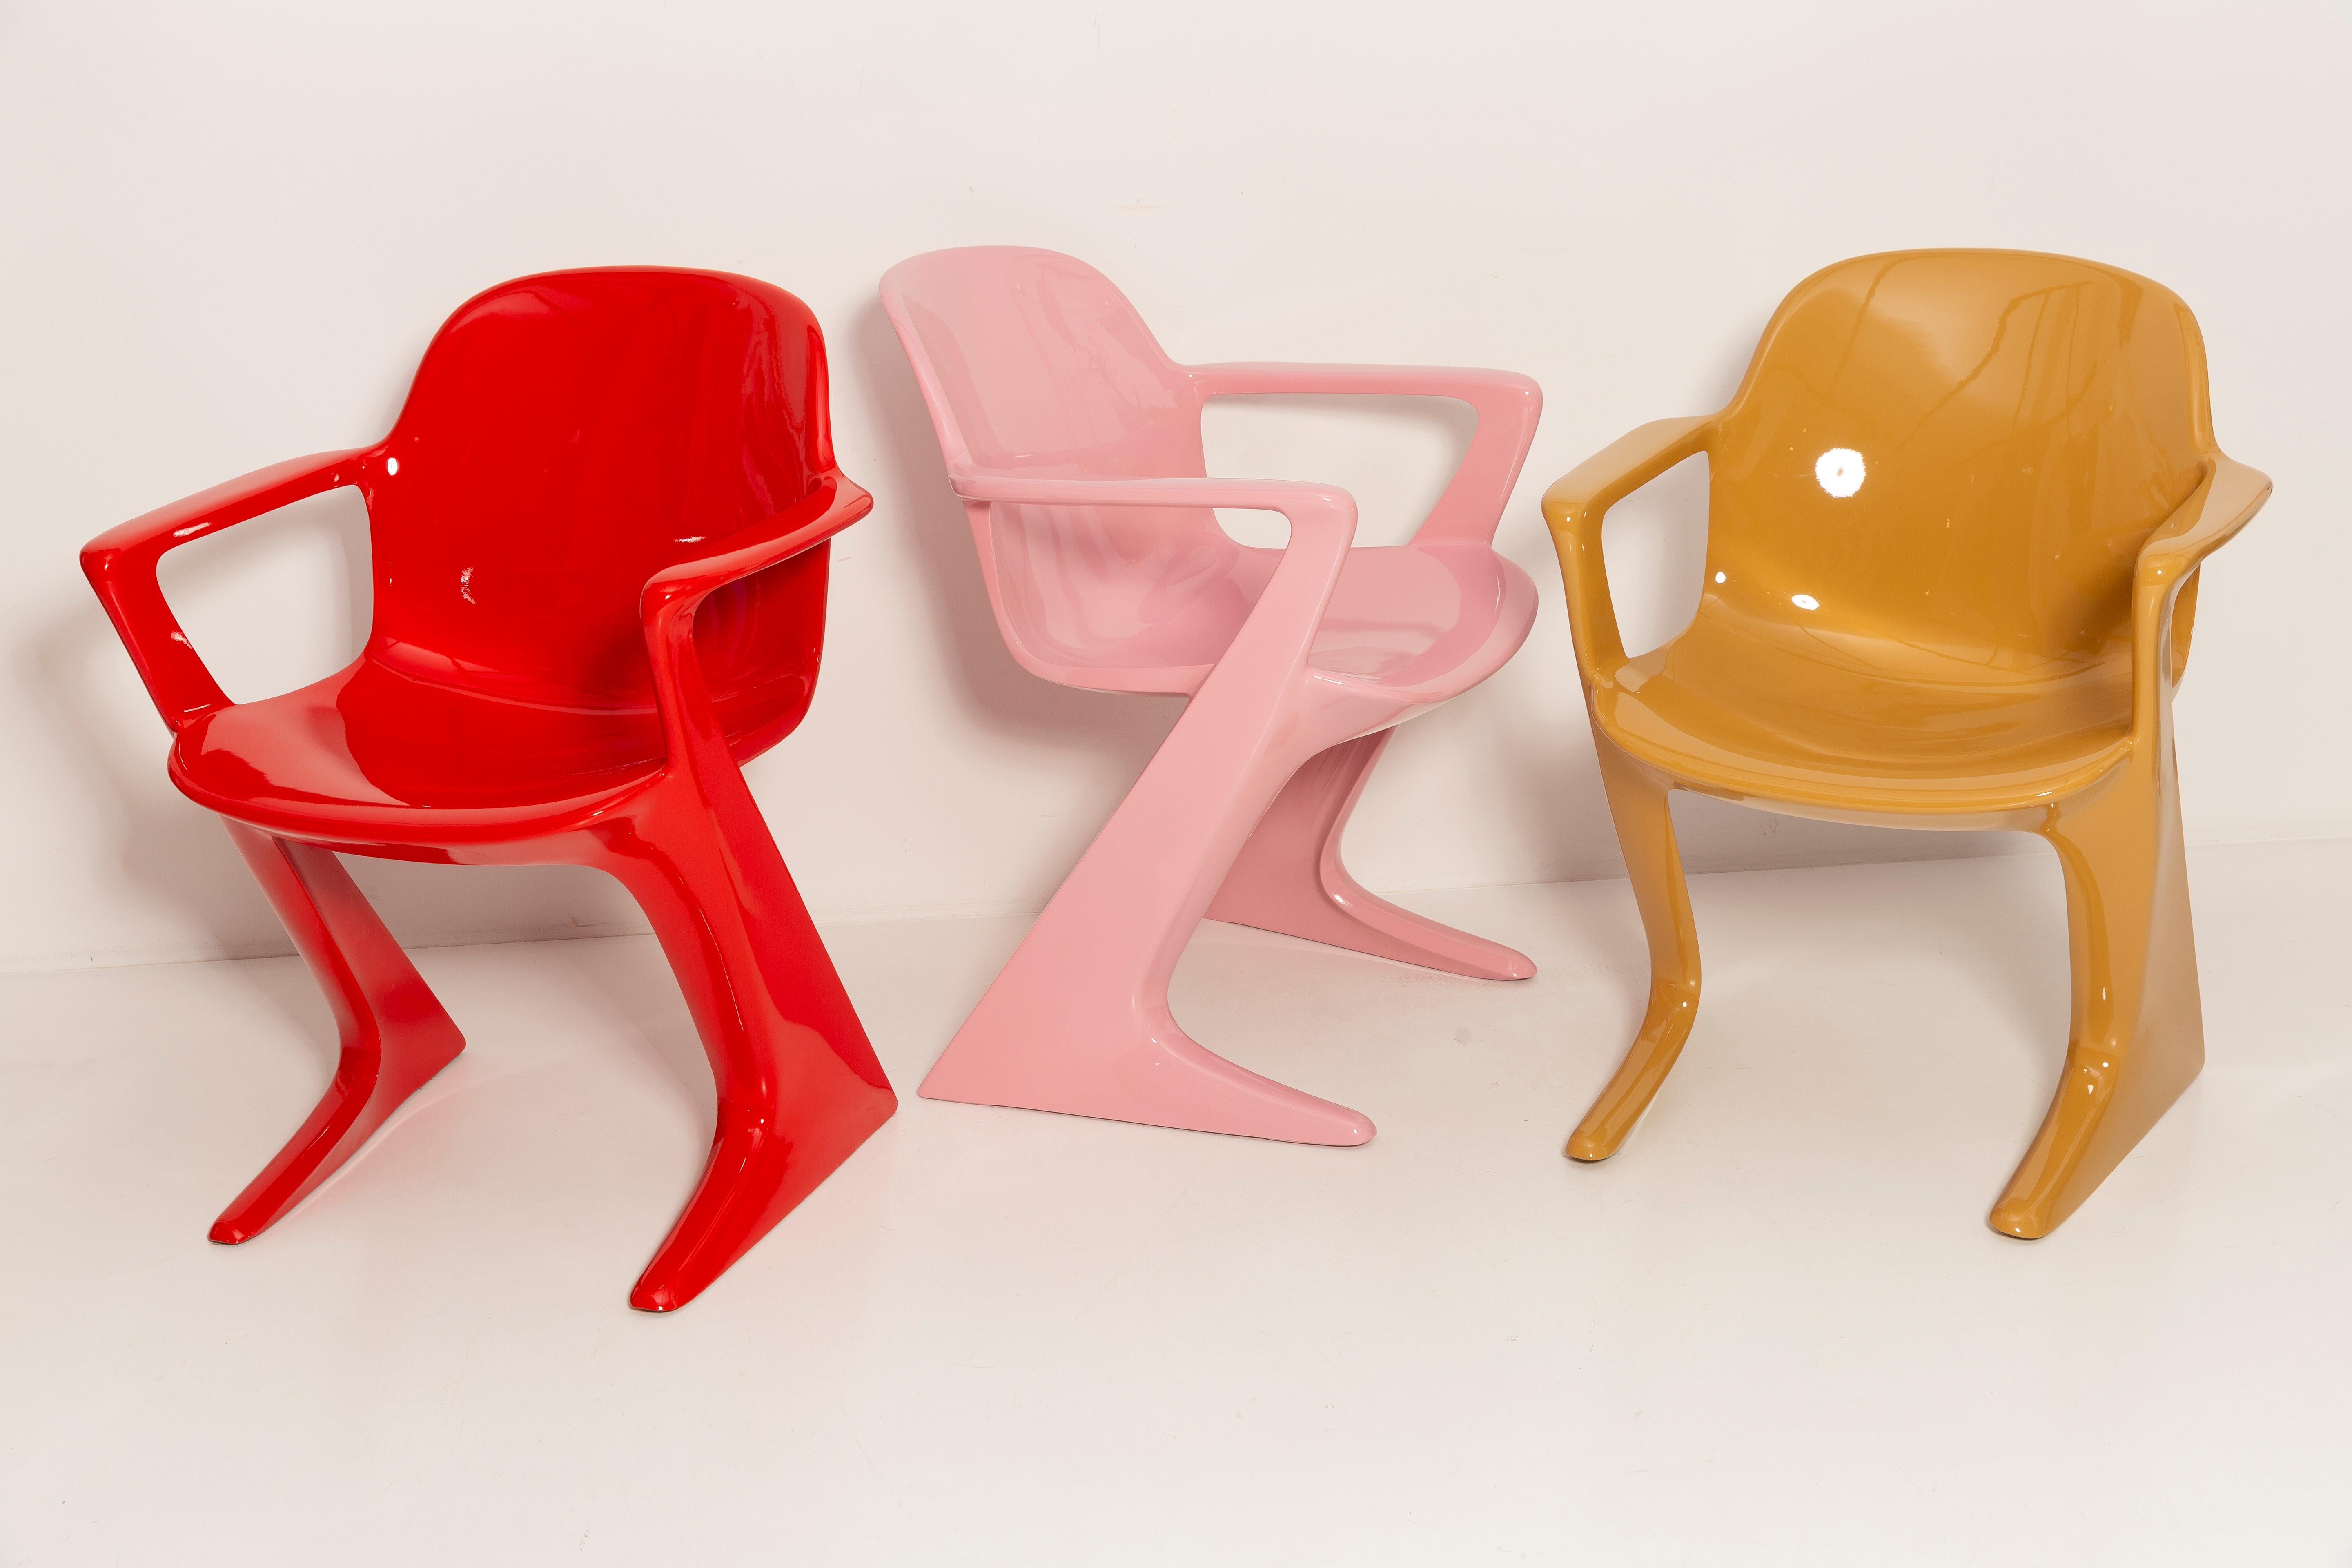 Set of Six Mid Century Kangaroo Chairs, Ernst Moeckl, Germany, 1968 For Sale 8